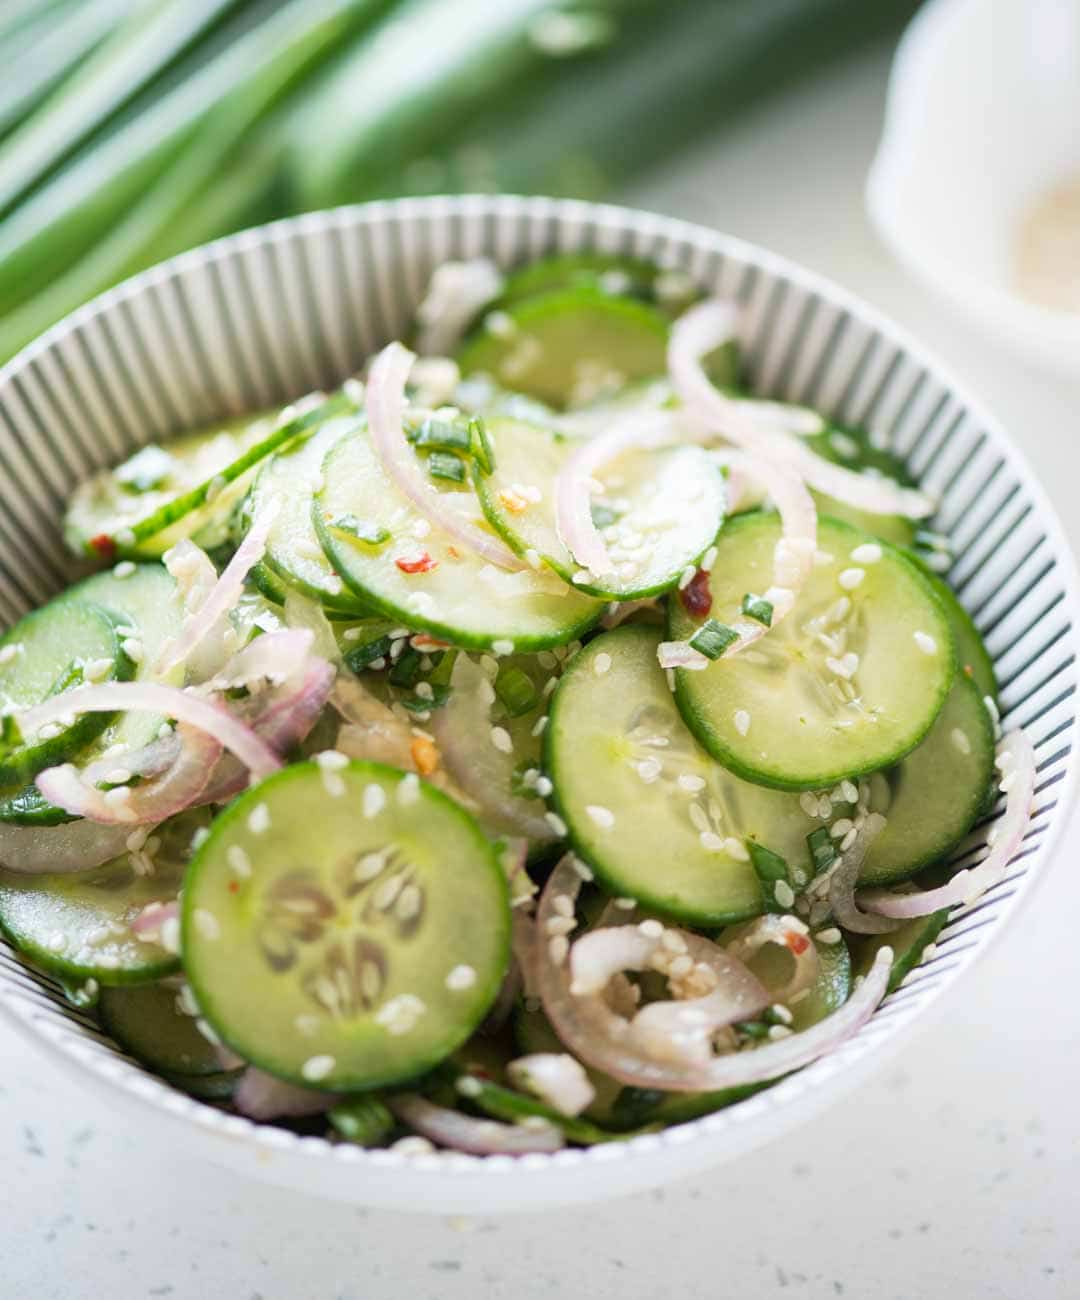 Cucumber salad with Asian salad dressing served in a white bowl.